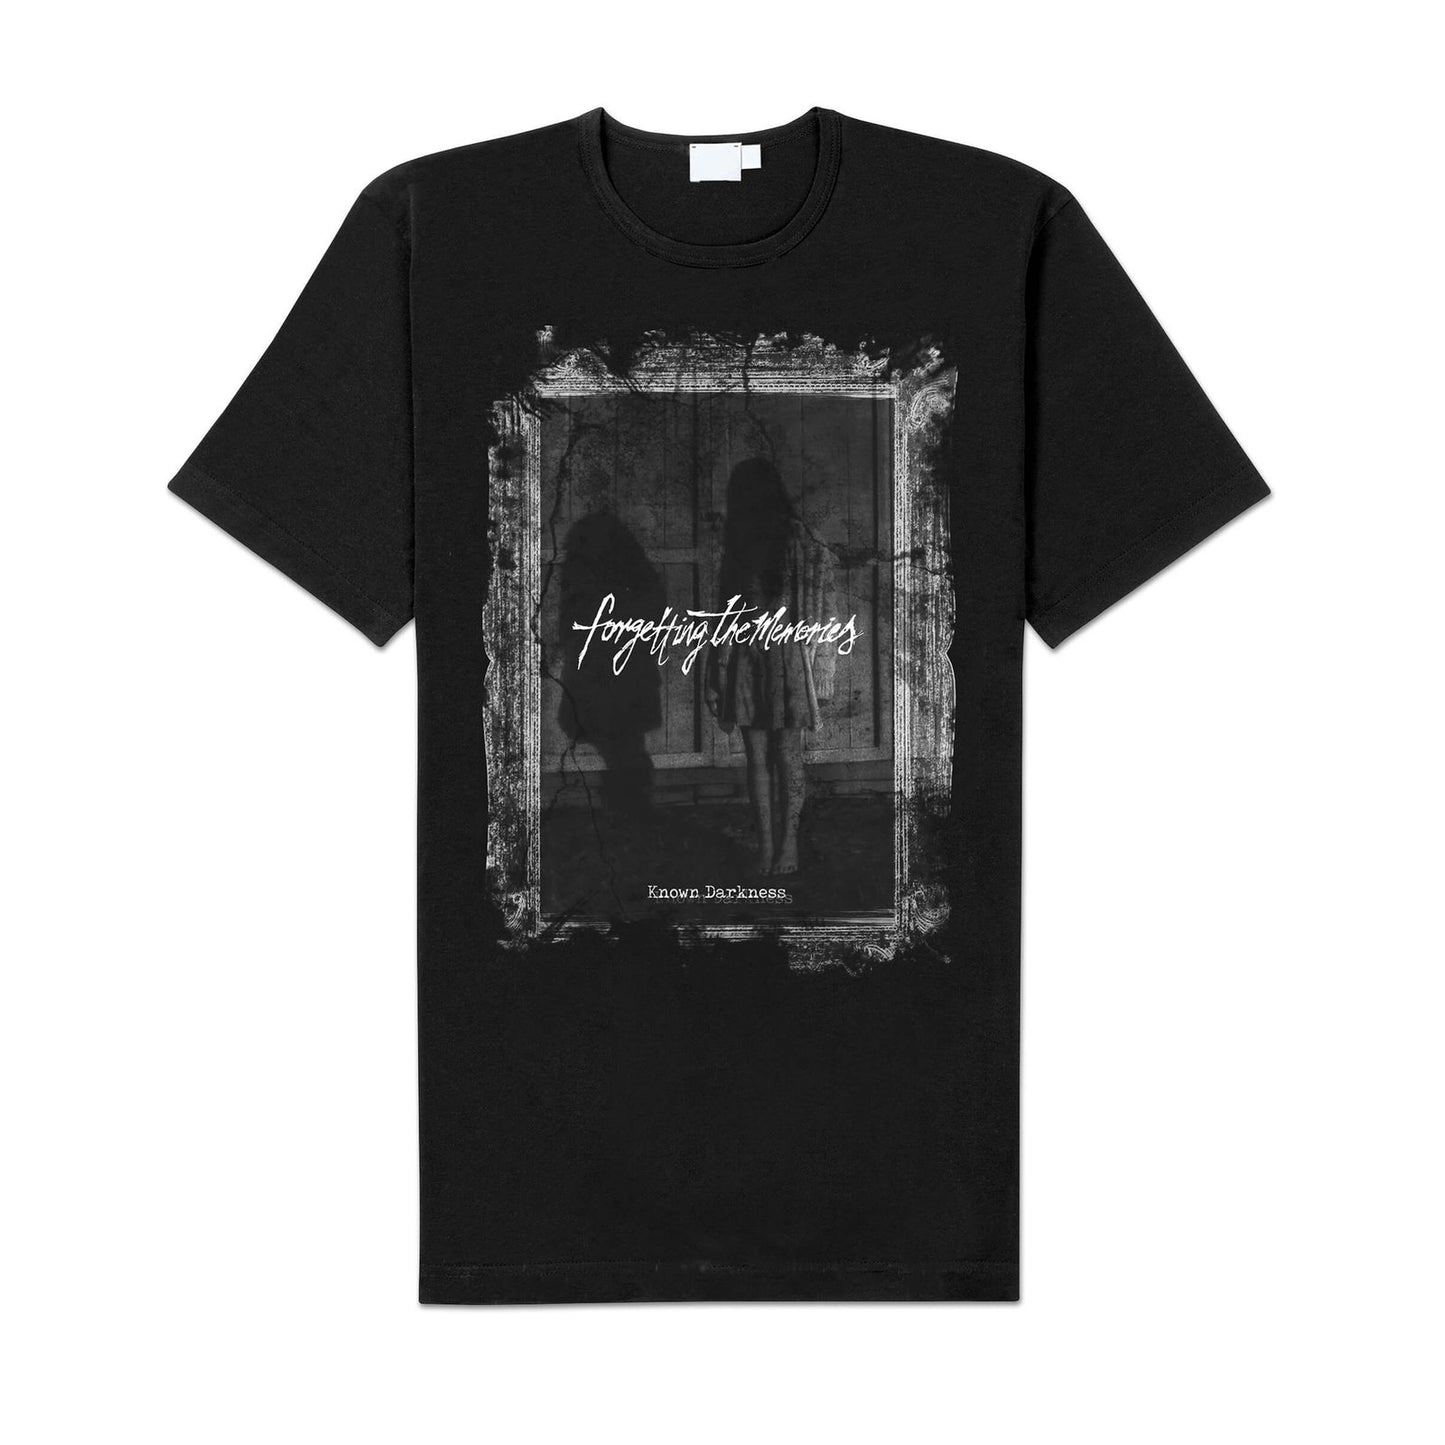 Forgetting The Memories "Known Darkness" Shirt